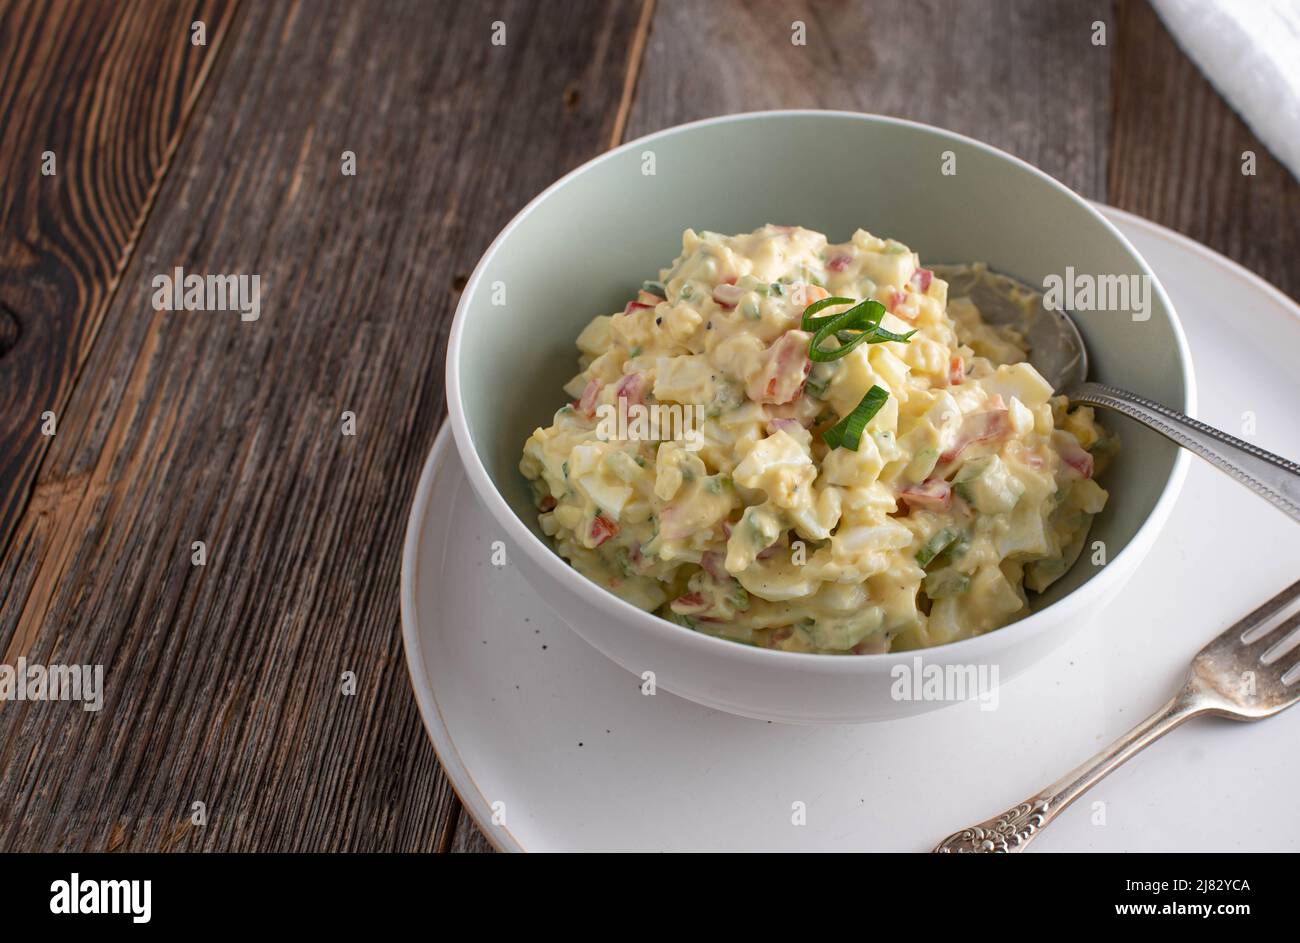 Fitness meal with high protein and   low fat egg salad made with herbs and vegetables and served in a bowl. Stock Photo